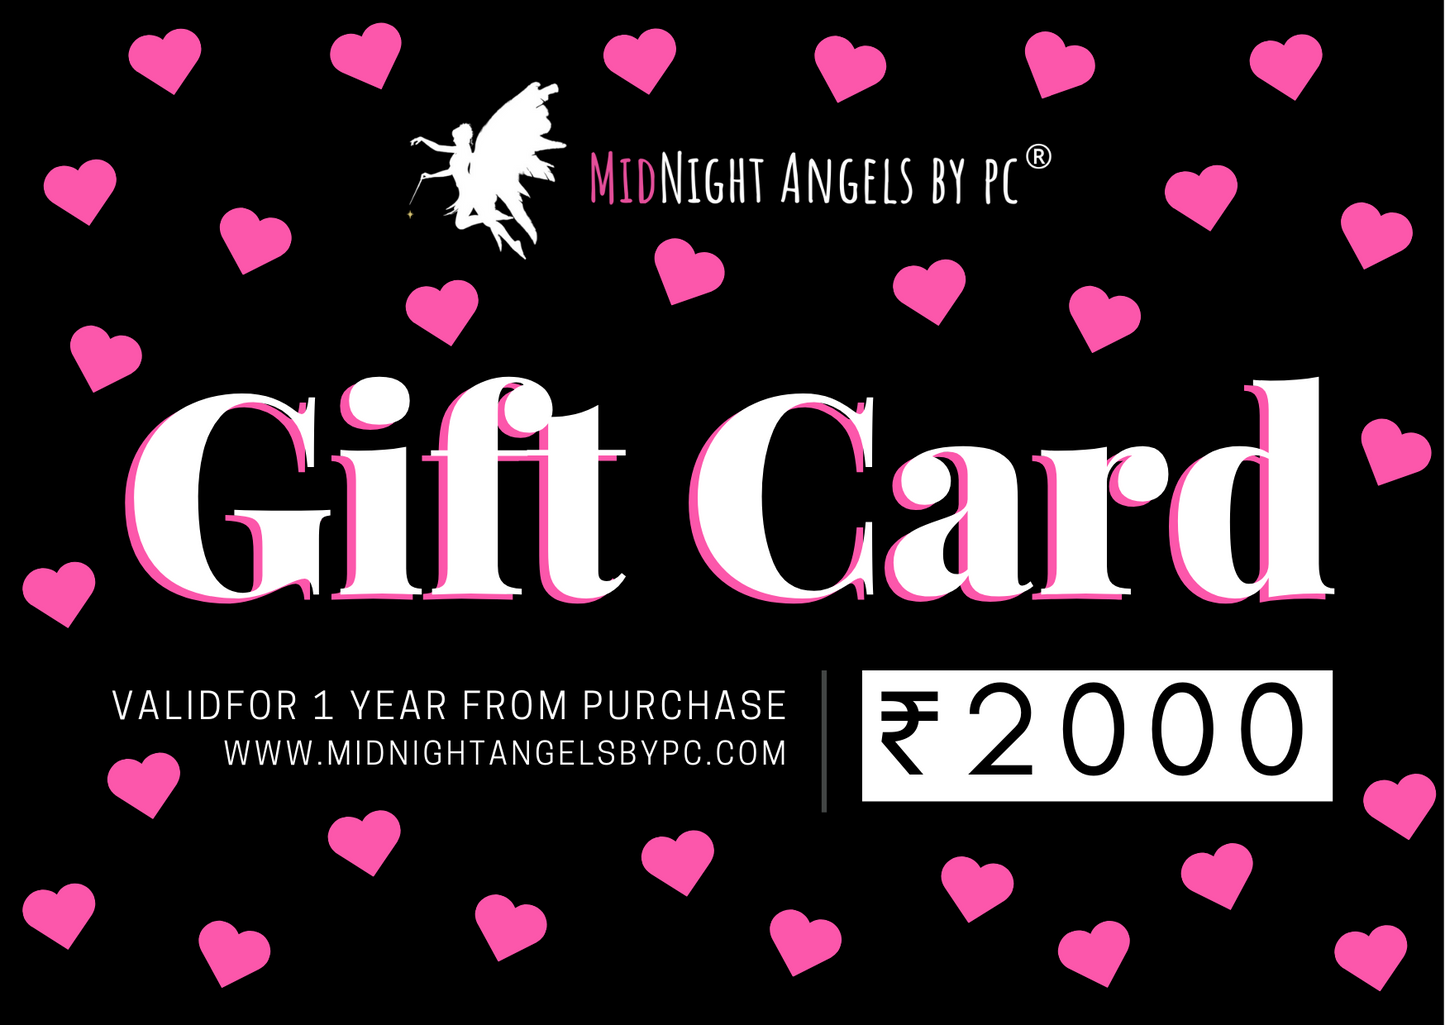 ₹2000/- MIDNIGHT ANGELs GIFT CARD